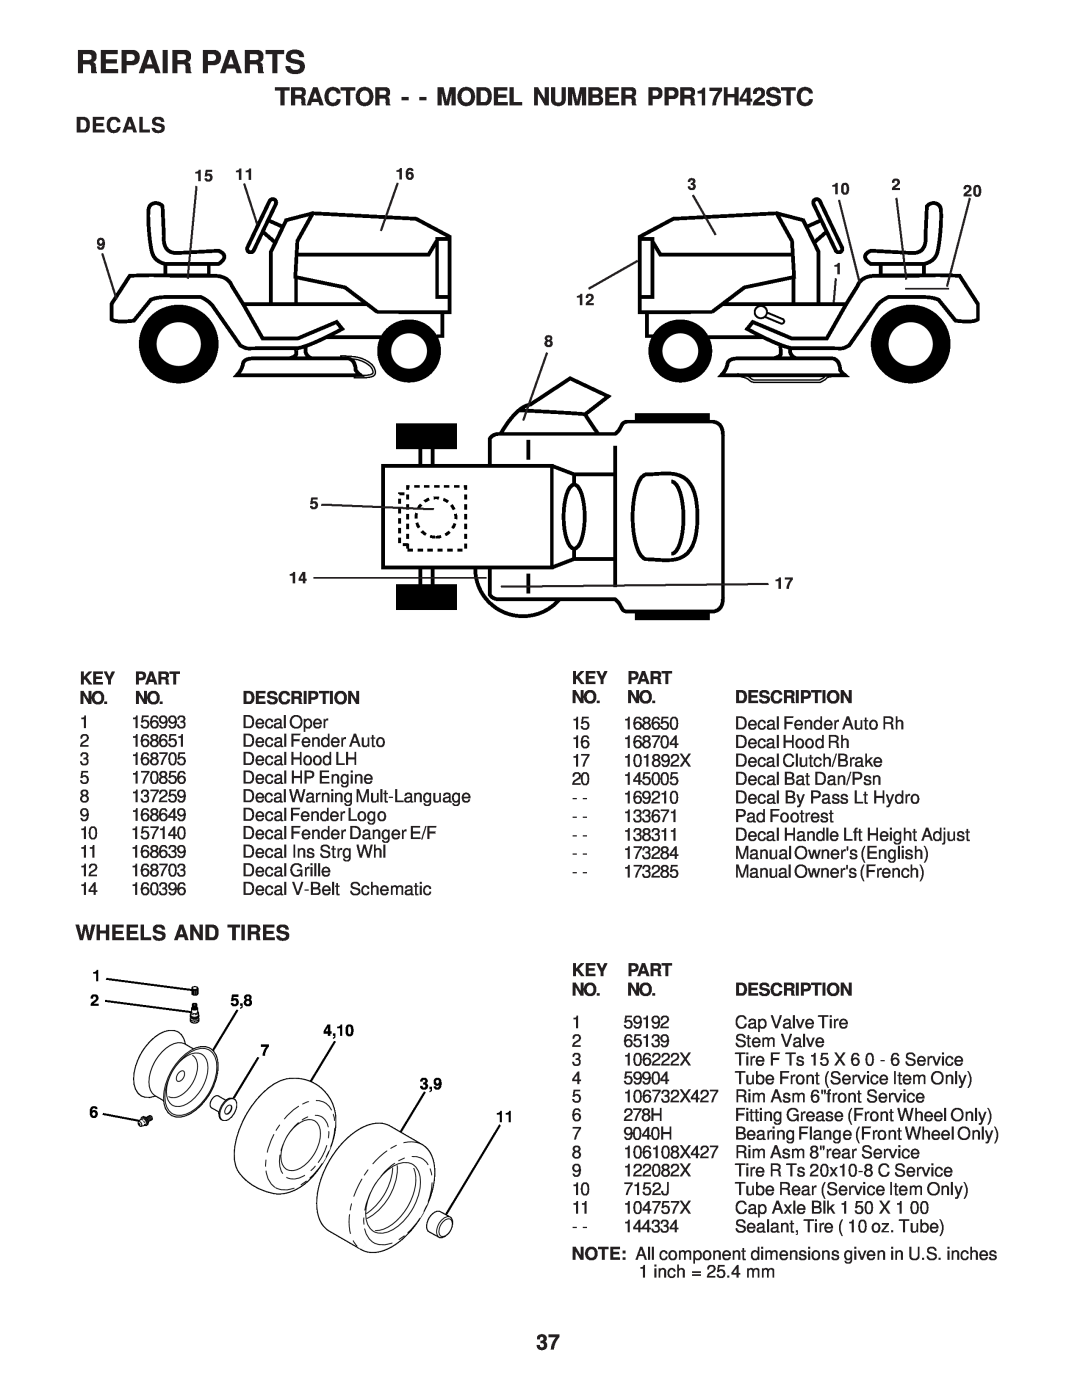 Poulan 173284 owner manual Decals, Wheels And Tires, Repair Parts, TRACTOR - - MODEL NUMBER PPR17H42STC 